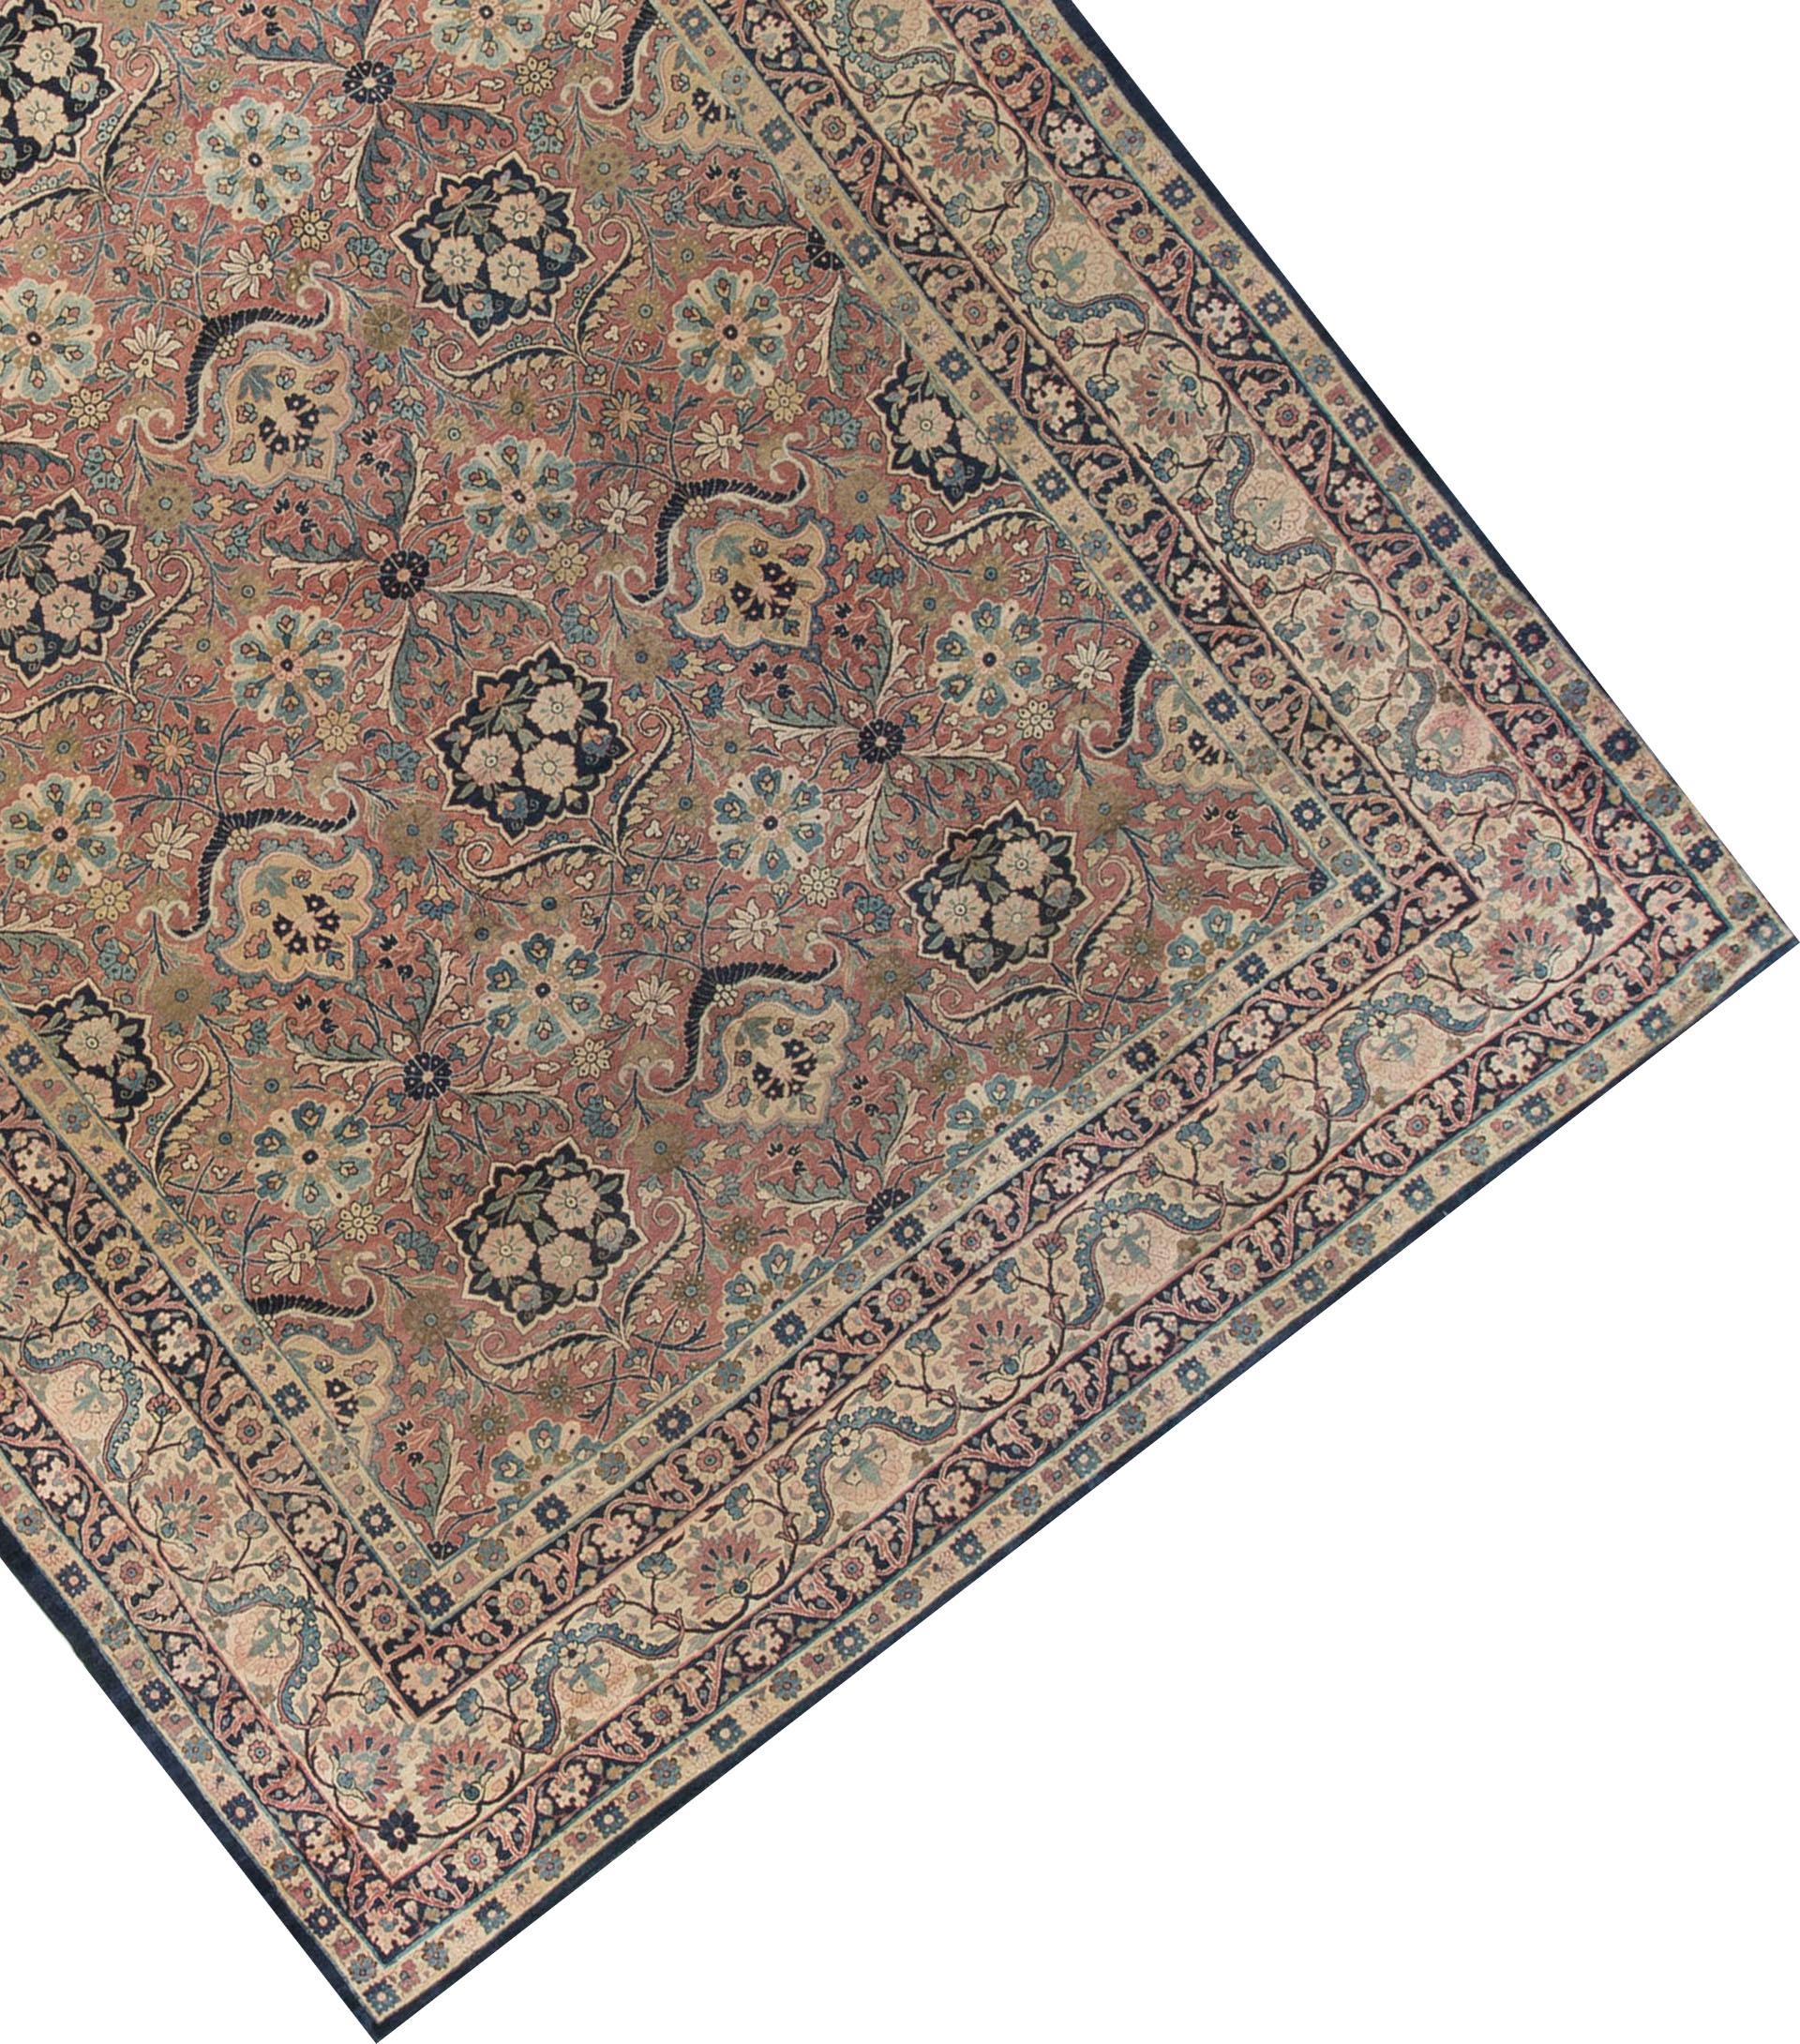 Kerman rugs, the most imaginative of all antique Persian urban rugs. Kerman city is the seat of Kerman province in SE Persia and is situated about 2000 feet in elevation. Weaving has been carried out continuously since about 1600 with a semi-hiatus